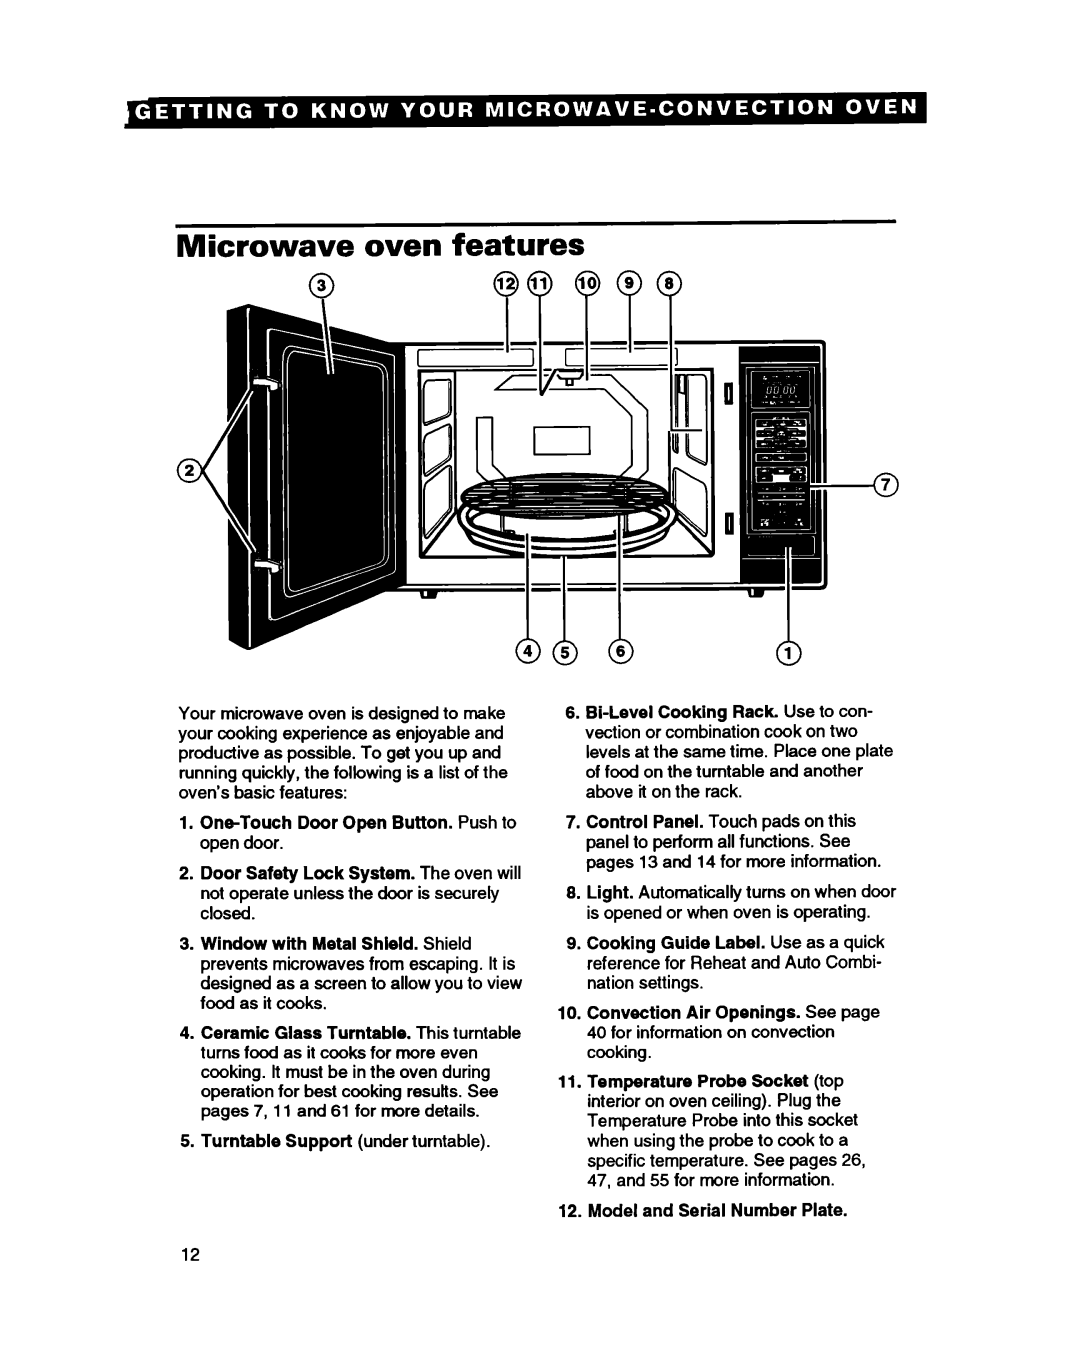 Whirlpool MC8130XA warranty Microwave oven features, Turntable Support under turntable, Model and Serial Number Plate 